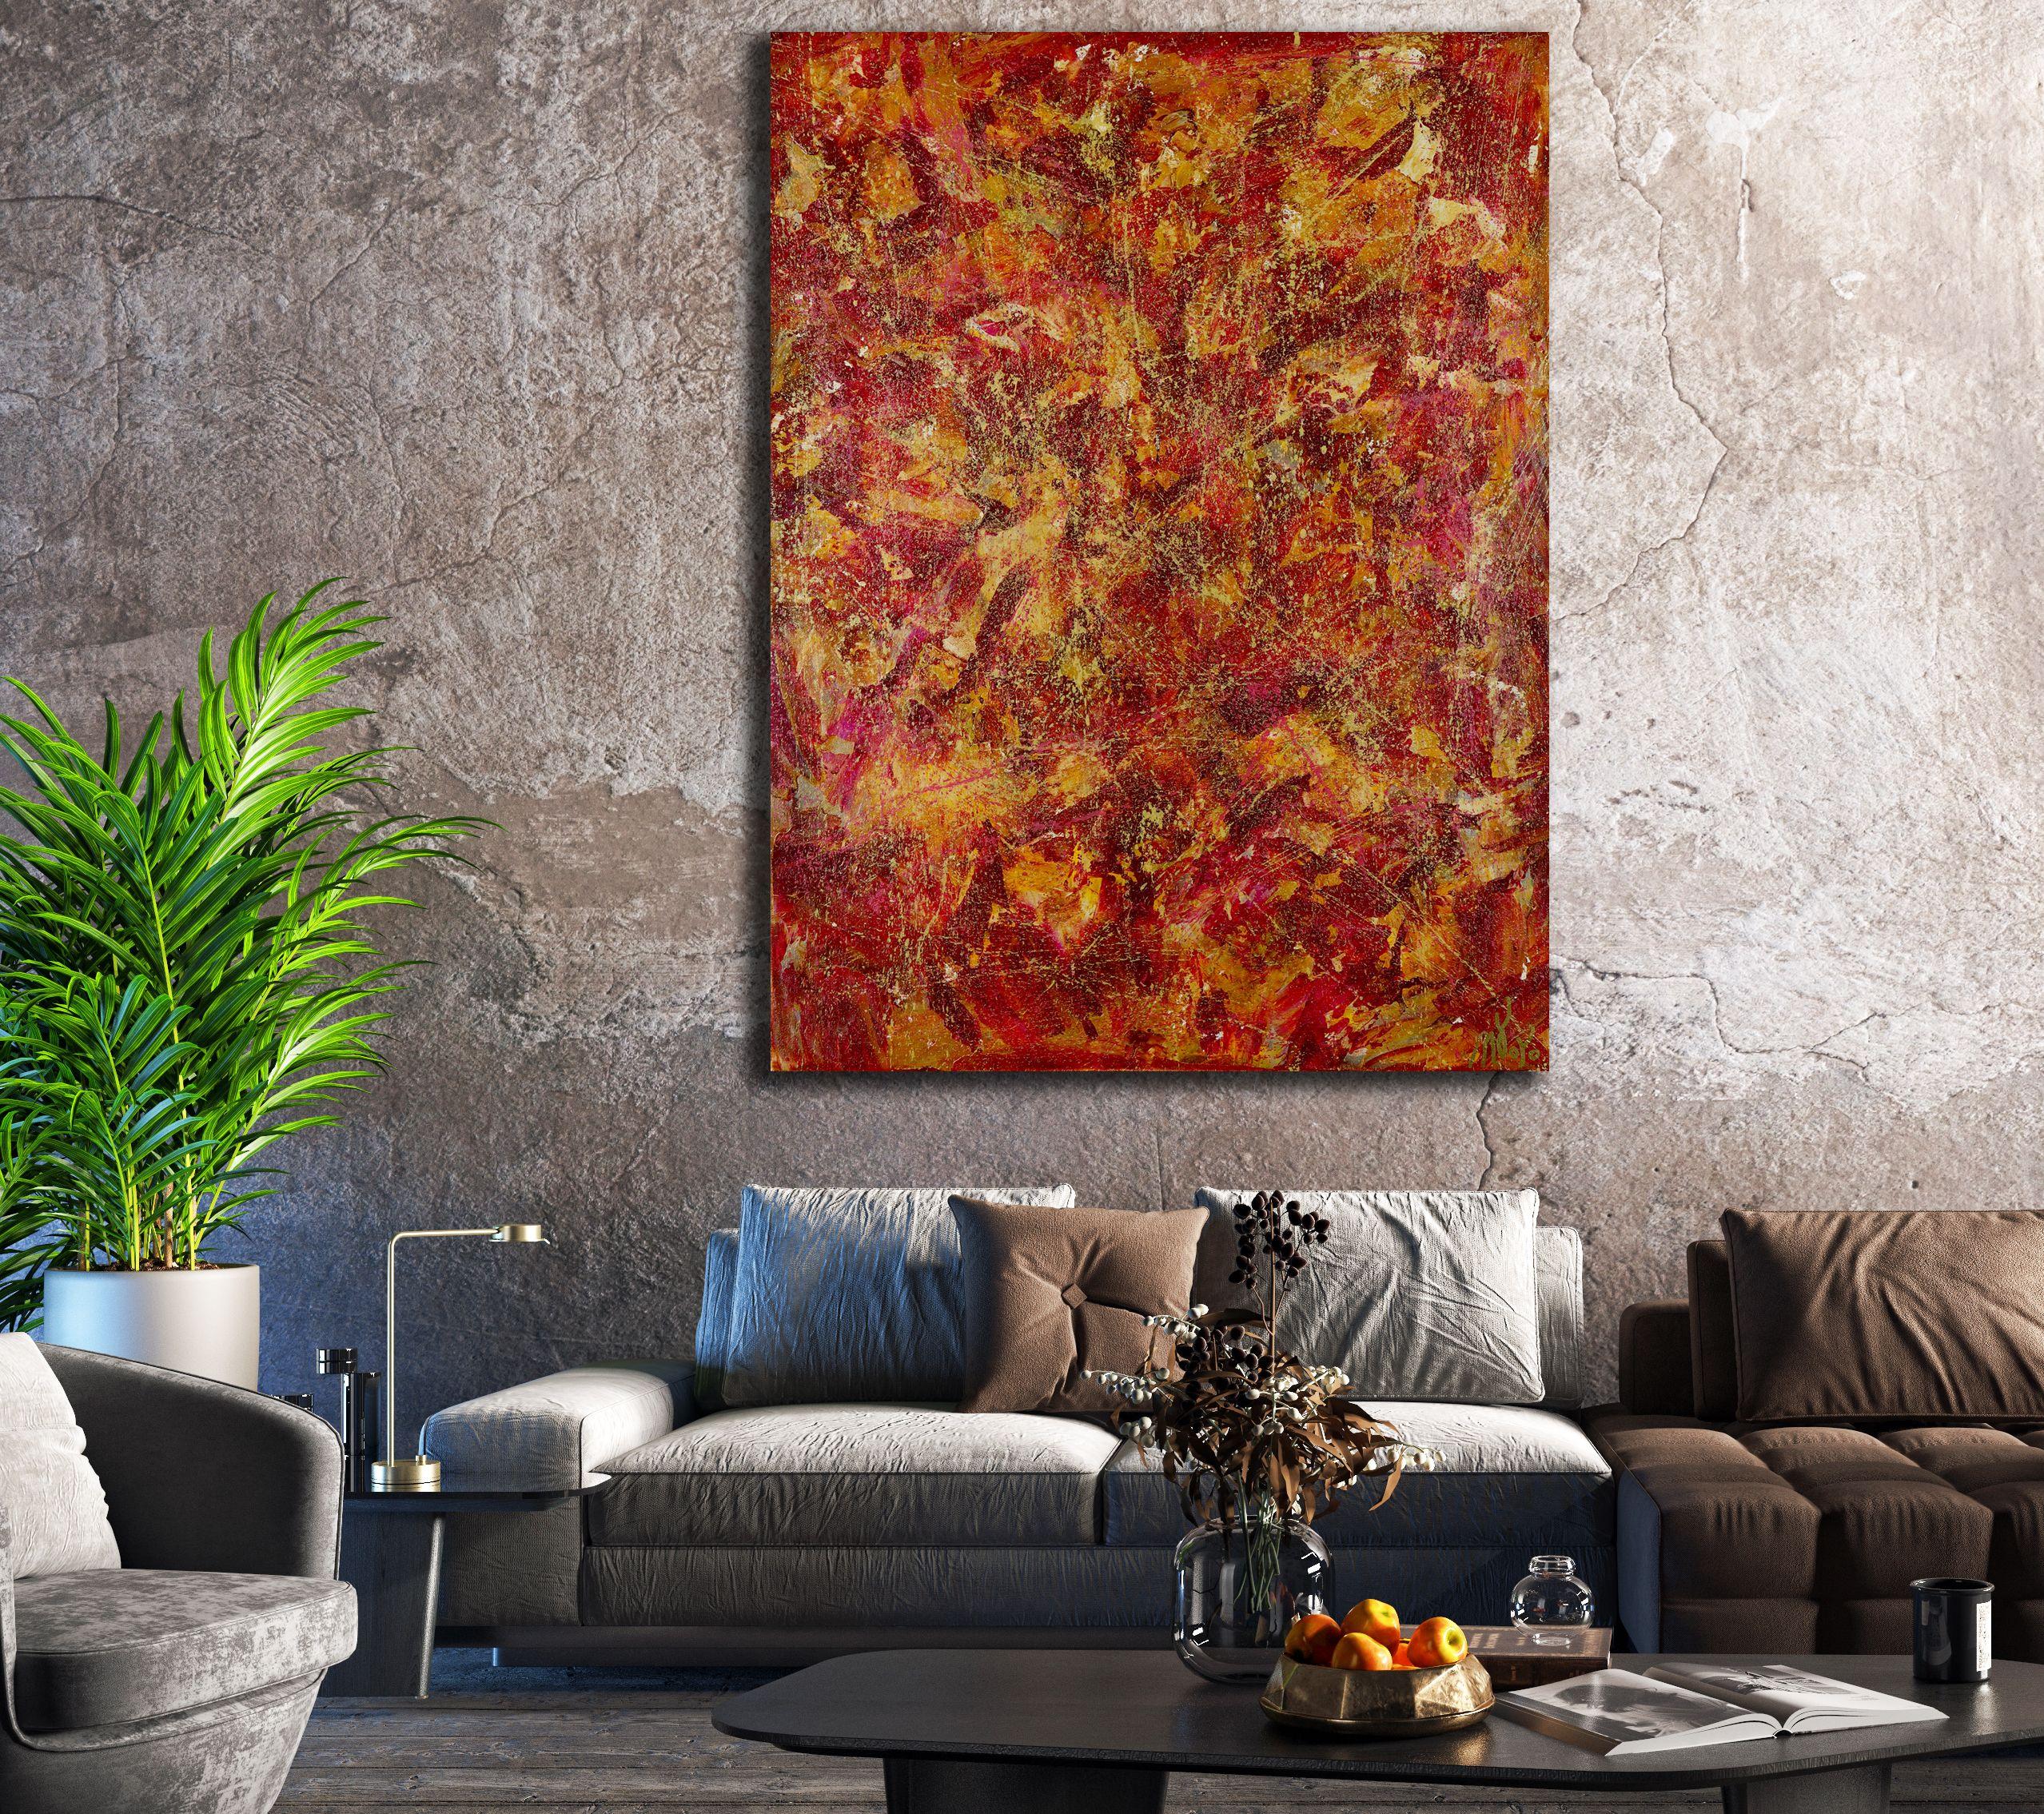 Inspired by nature landscape painting with earthy color blending, contrast and details. Textured with layers of red, orange and gold!    Inspired by colors of nature with subtle greens and intricate details (see close-ups).    This artwork its